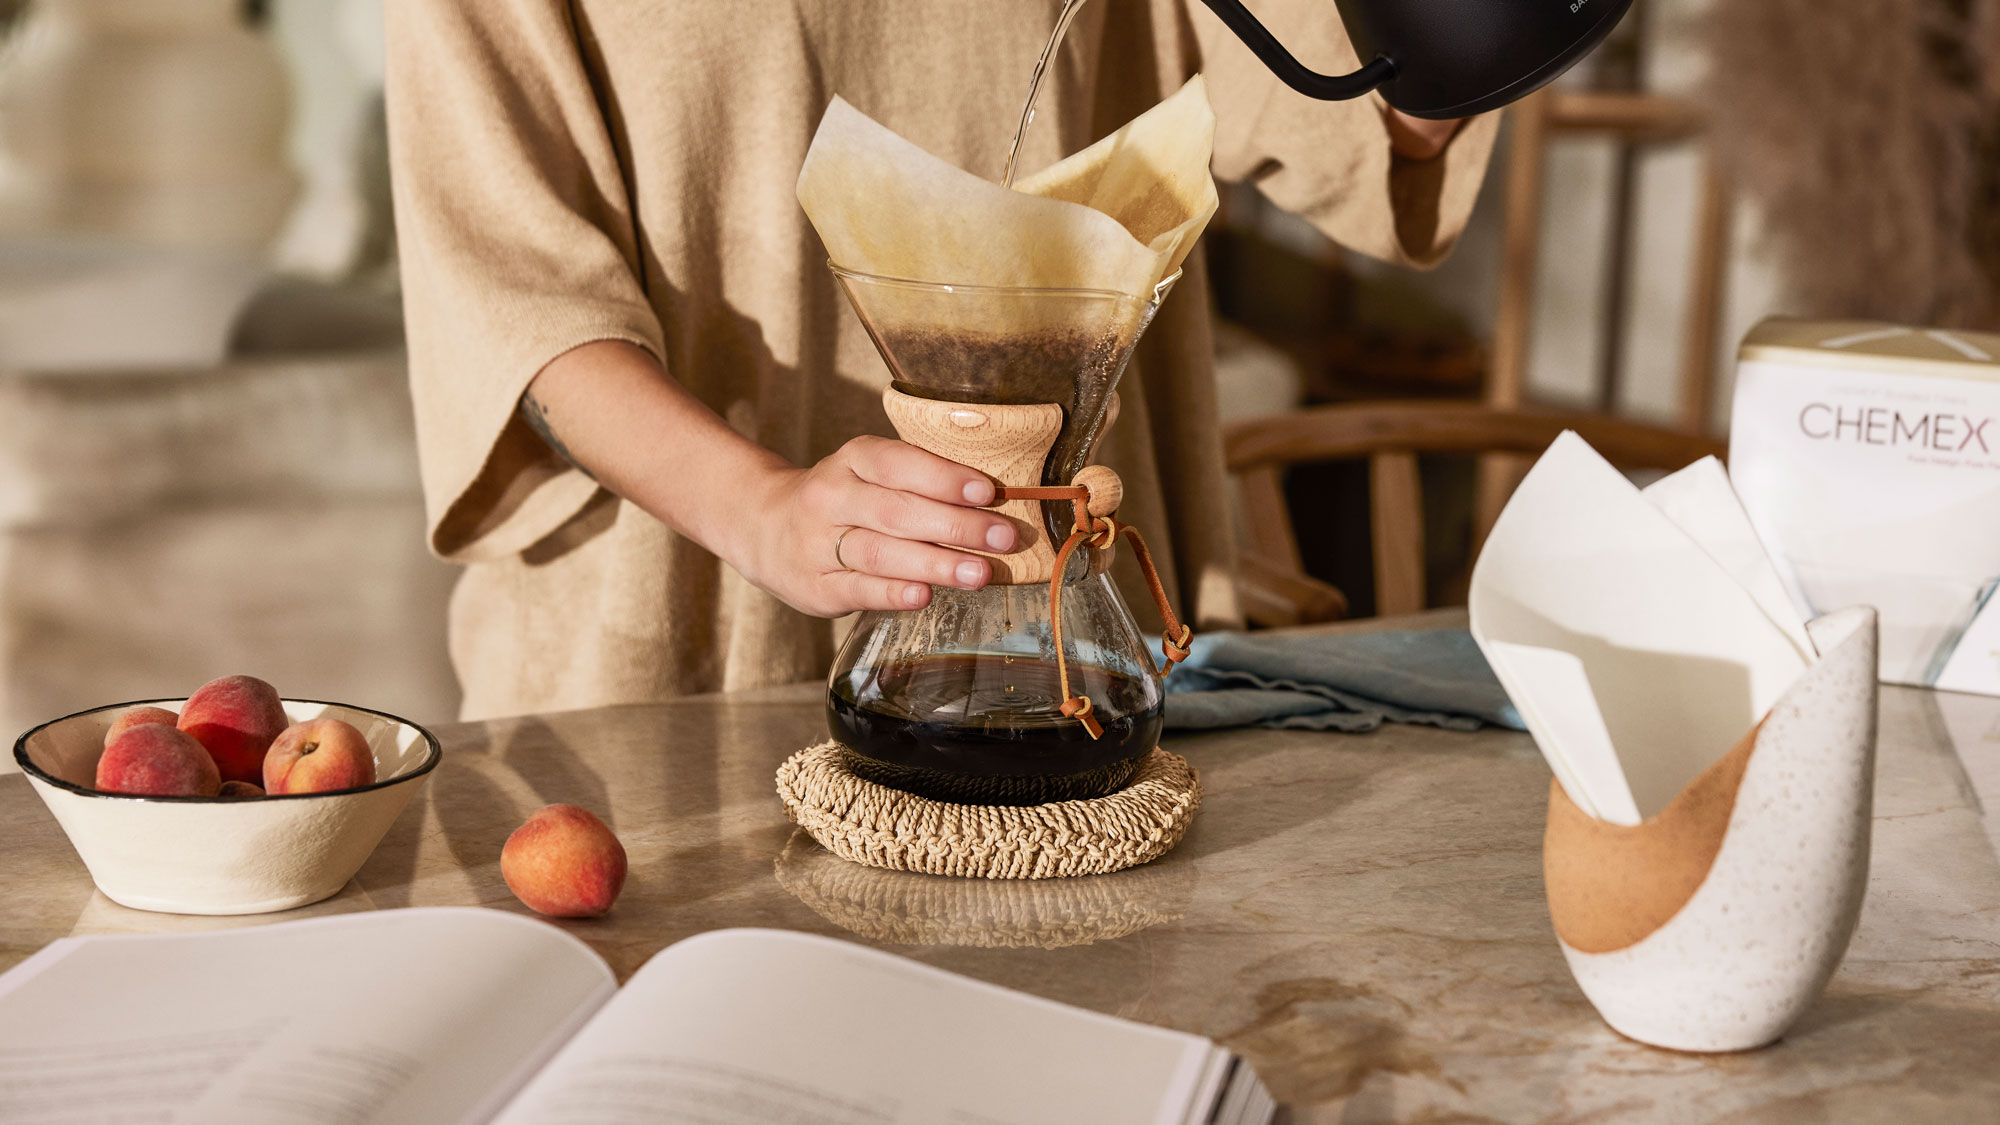 http://res.cloudinary.com/hbhhv9rz9/image/upload/v1659030232/Merch%20PDPs/Chemex%206-Cup%20Filters/Chemex-6-Cup-Filters-M4-Lifestyle-Desktop.jpg